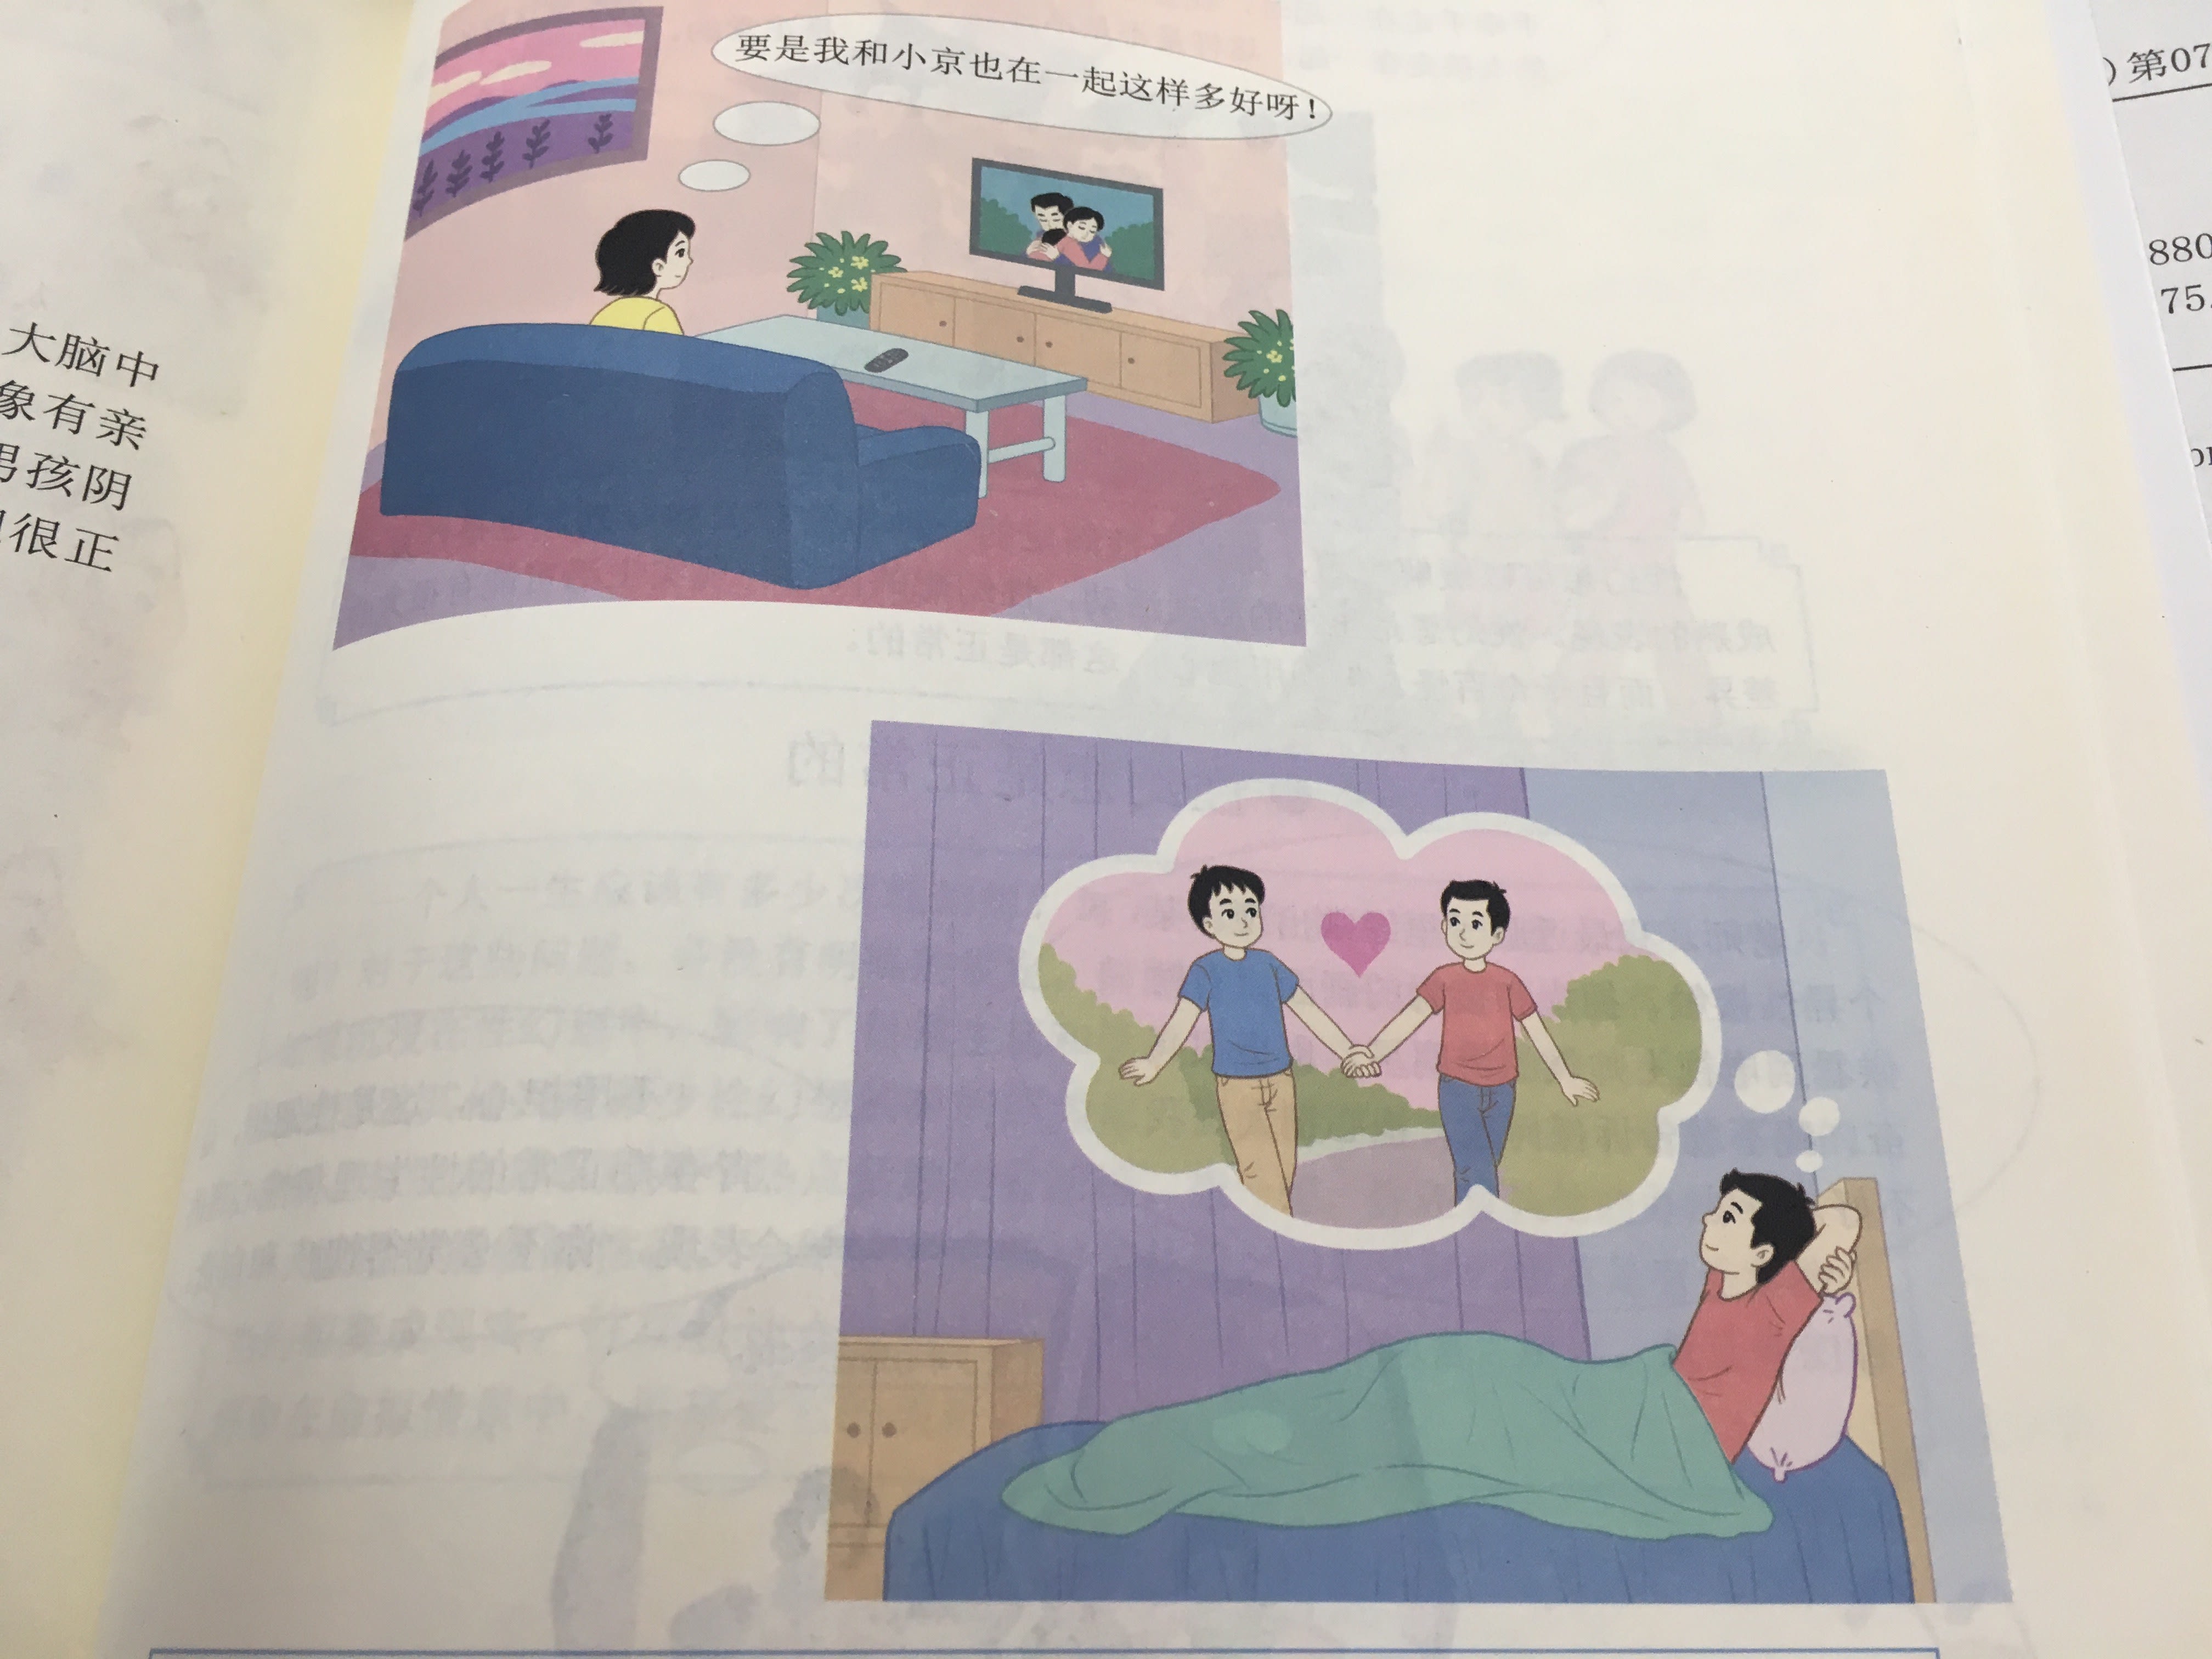 Xxx China Porn School - Shock and praise for groundbreaking sex-ed textbook in China | CNN